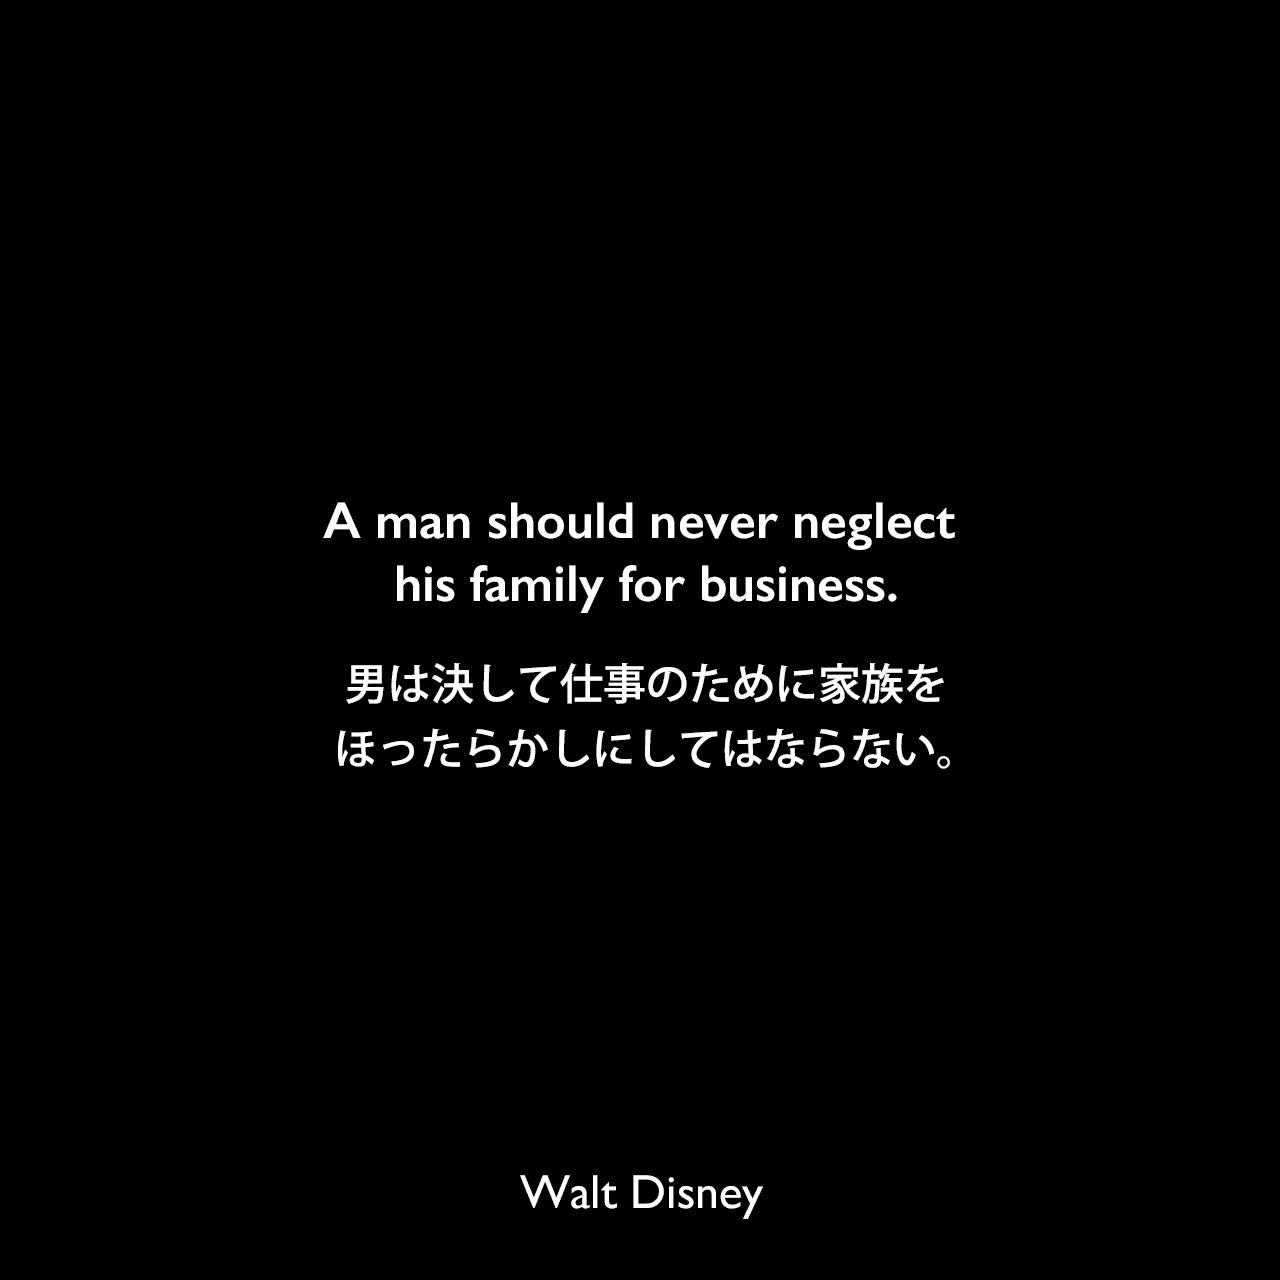 A man should never neglect his family for business.男は決して仕事のために家族をほったらかしにしてはならない。- パットウィリアムズによる本「How to Be Like Walt: Capturing the Disney Magic Every Day of Your Life」よりWalt Disney